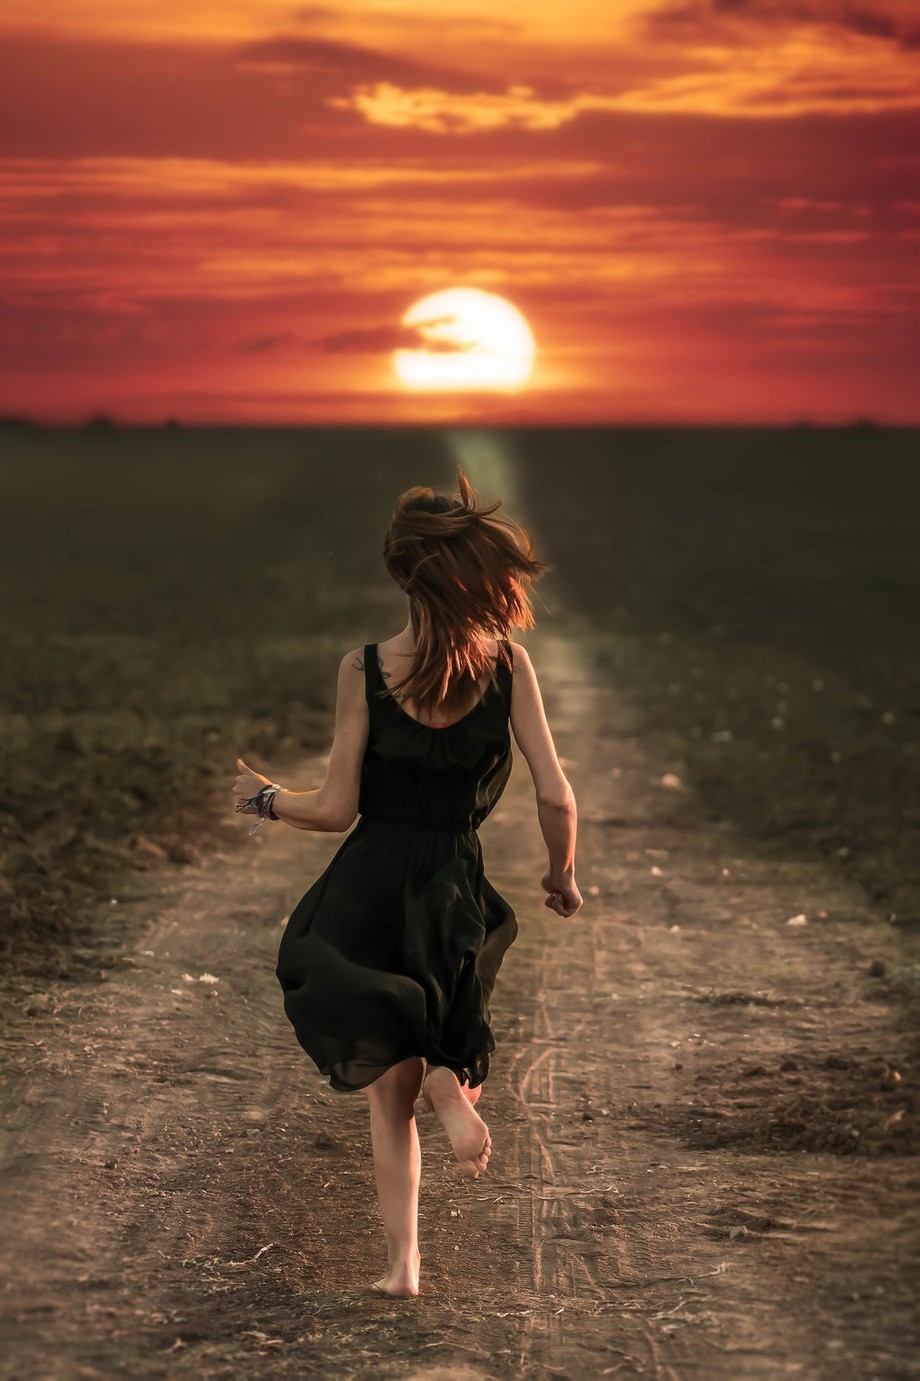 Run Away To The Sun. by Florianpascual - Image Of The Month Photo Contest Vol 4